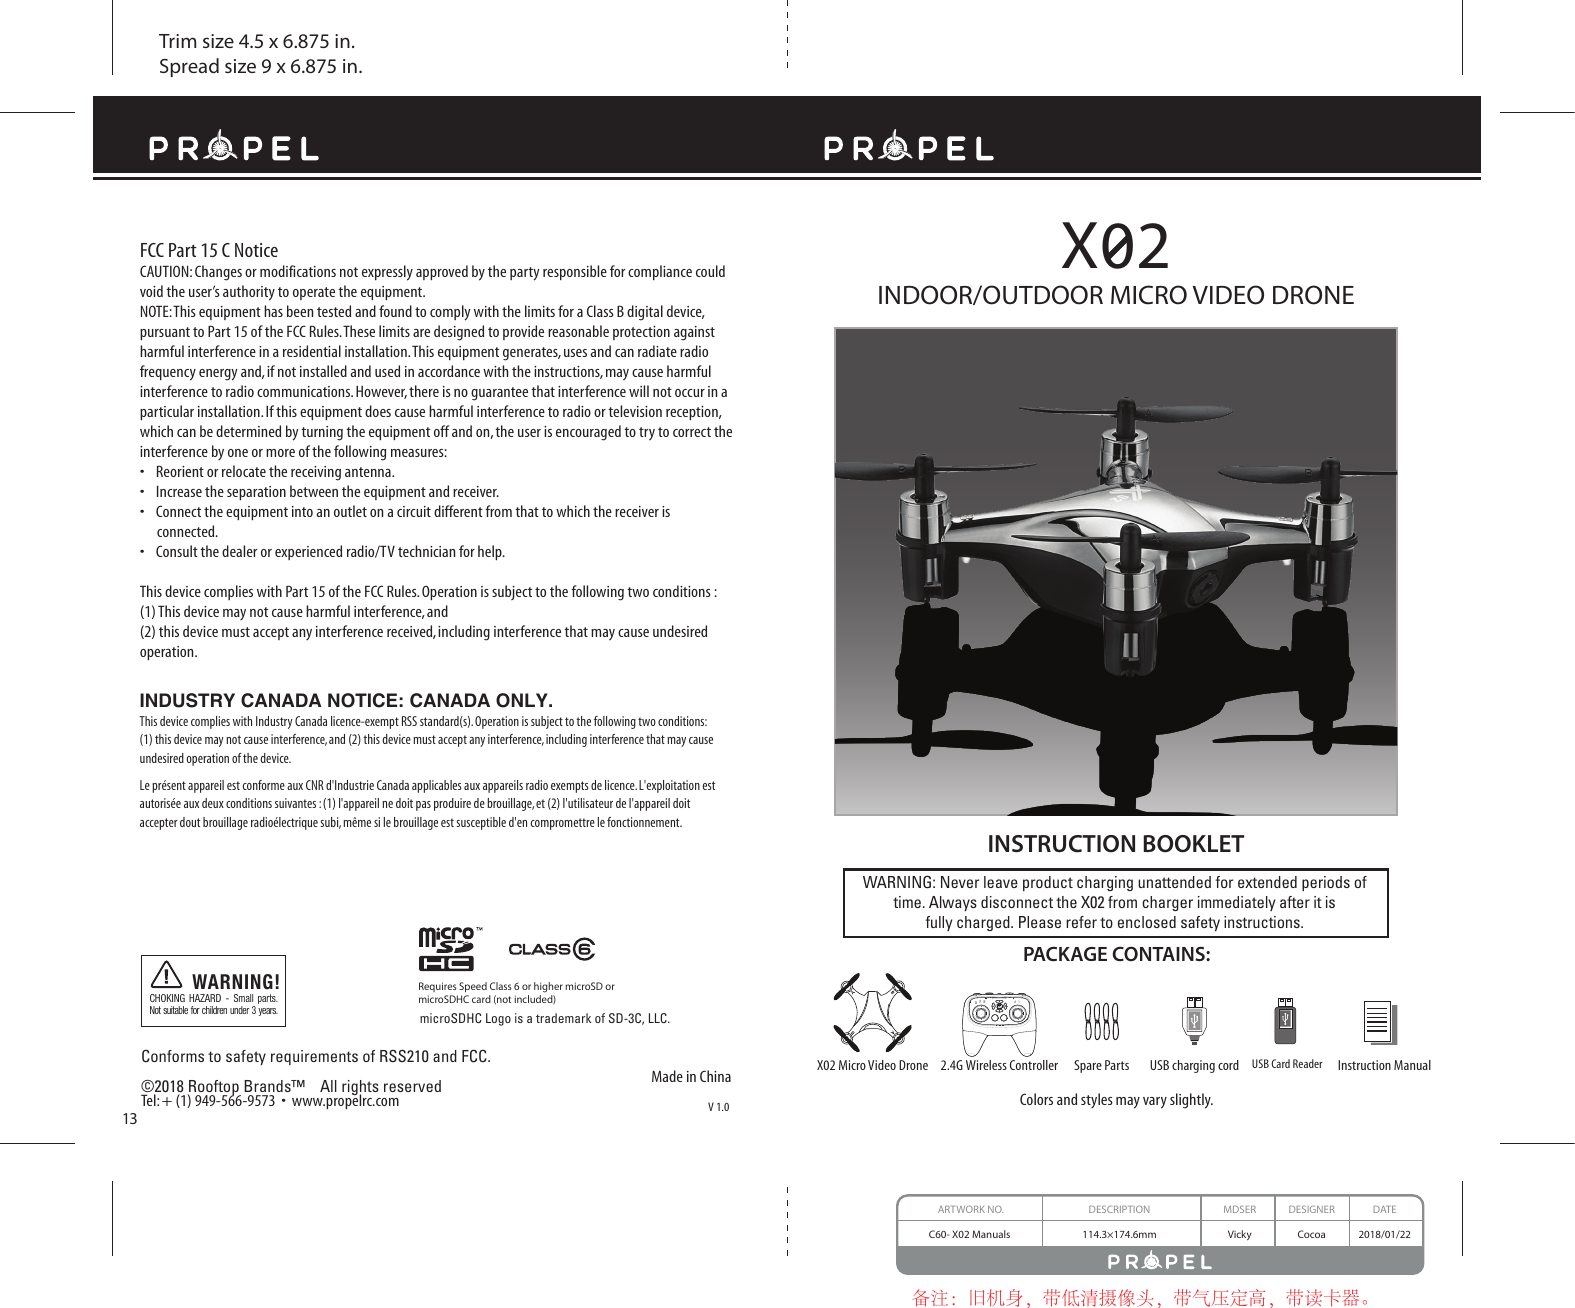 Page 1 of Asian Express VL-3520T X02 Micro Drone with Video User Manual C60 WM X02 Video Drone IM Eng 20180122